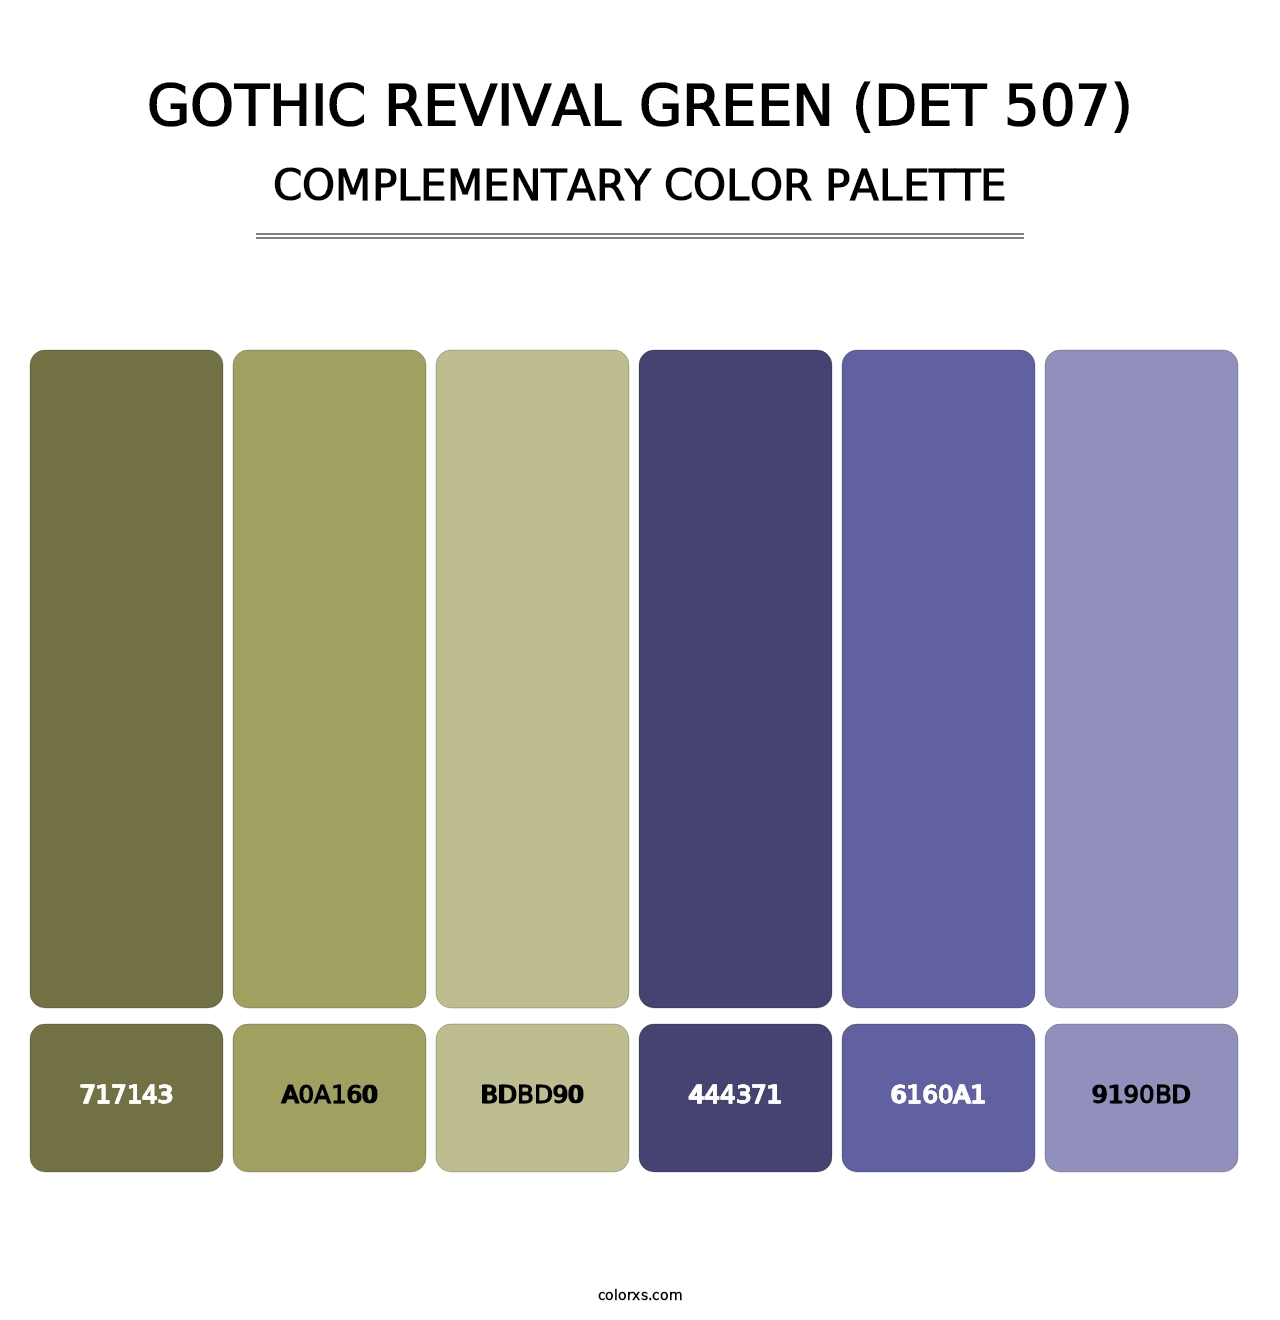 Gothic Revival Green (DET 507) - Complementary Color Palette